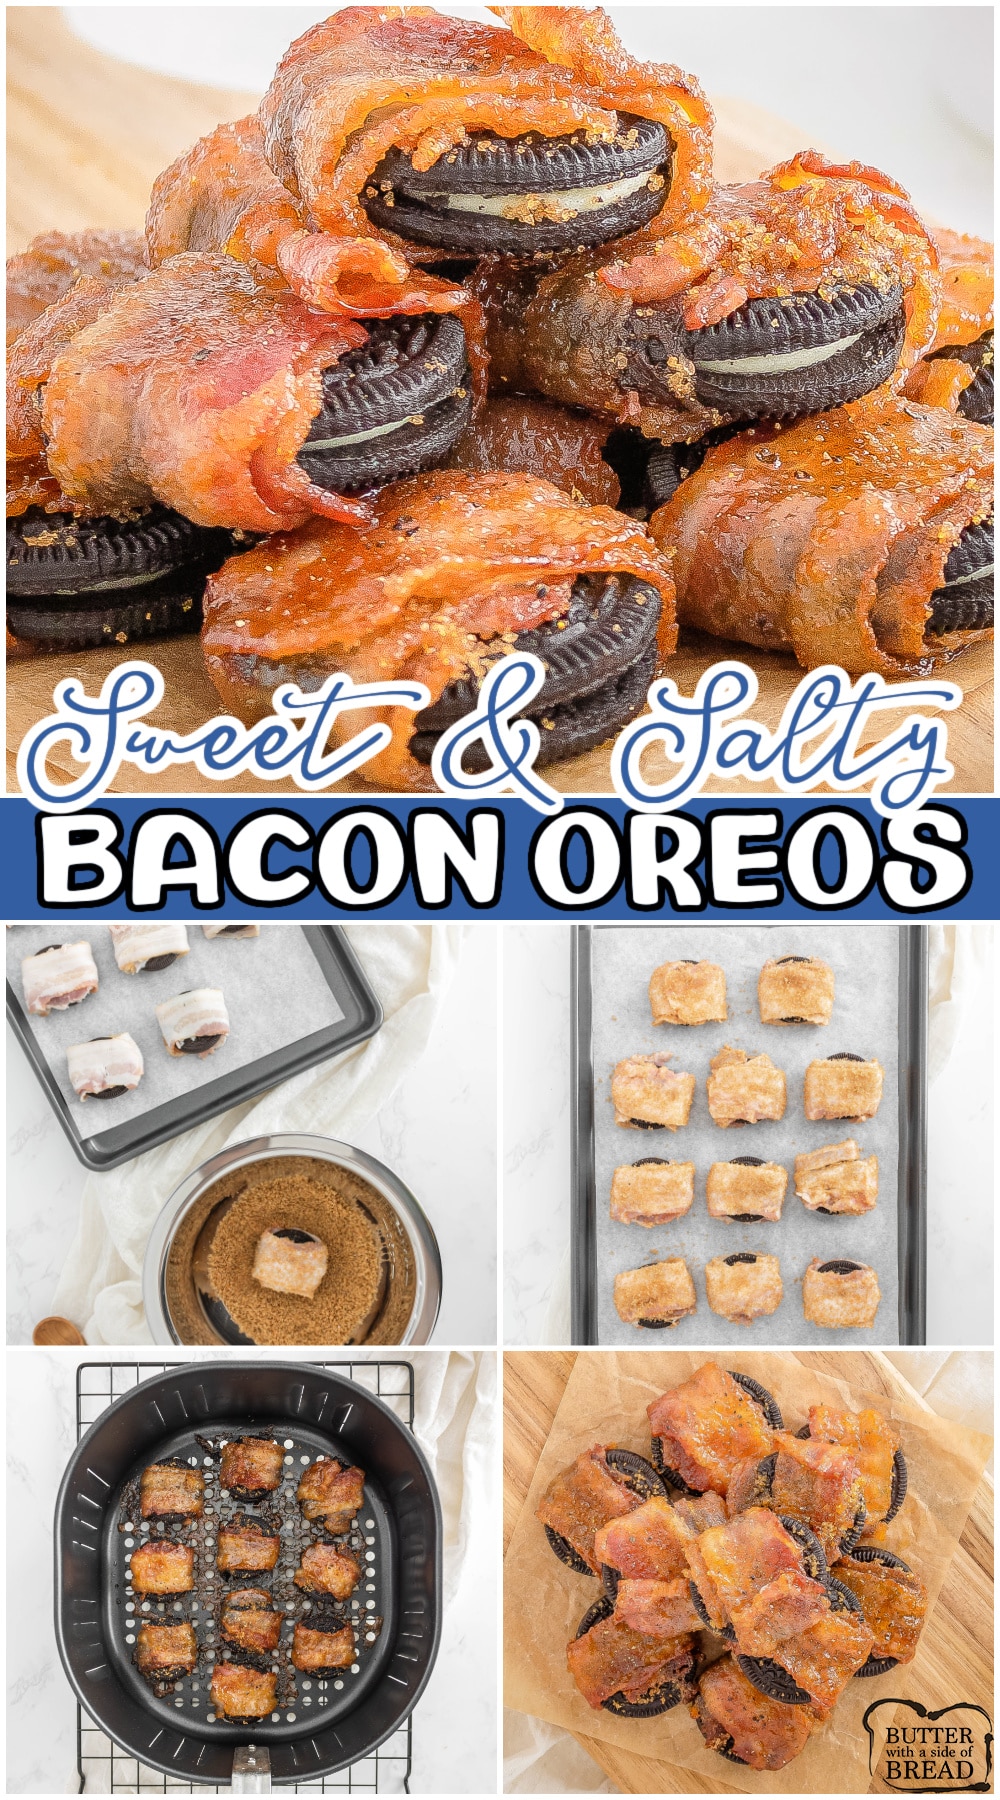 Bacon Wrapped Oreos are a sweet, salty and oh so tasty snack everyone loves! These oreos wrapped in bacon are so easy to make & satisfy a craving you never knew you had!